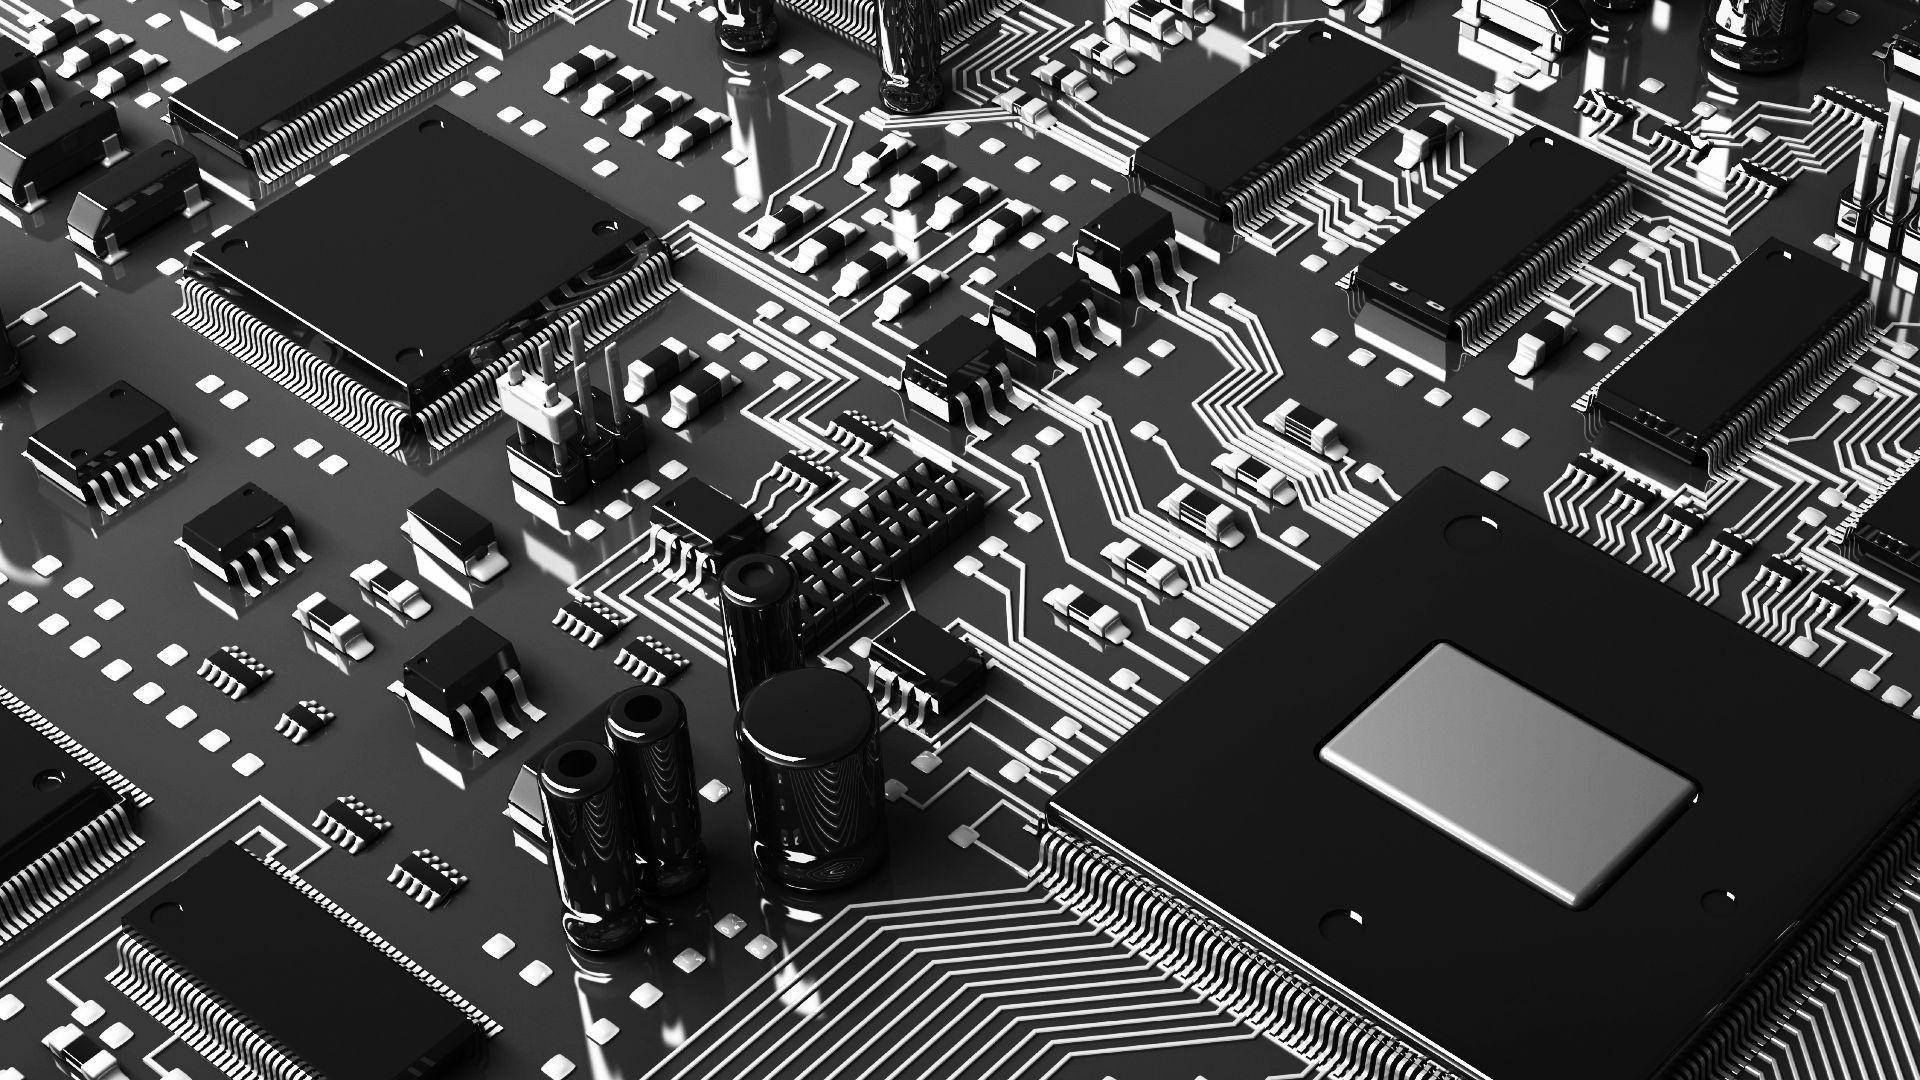 Motherboard Wallpapers, HD Motherboard Backgrounds, Free Images Download